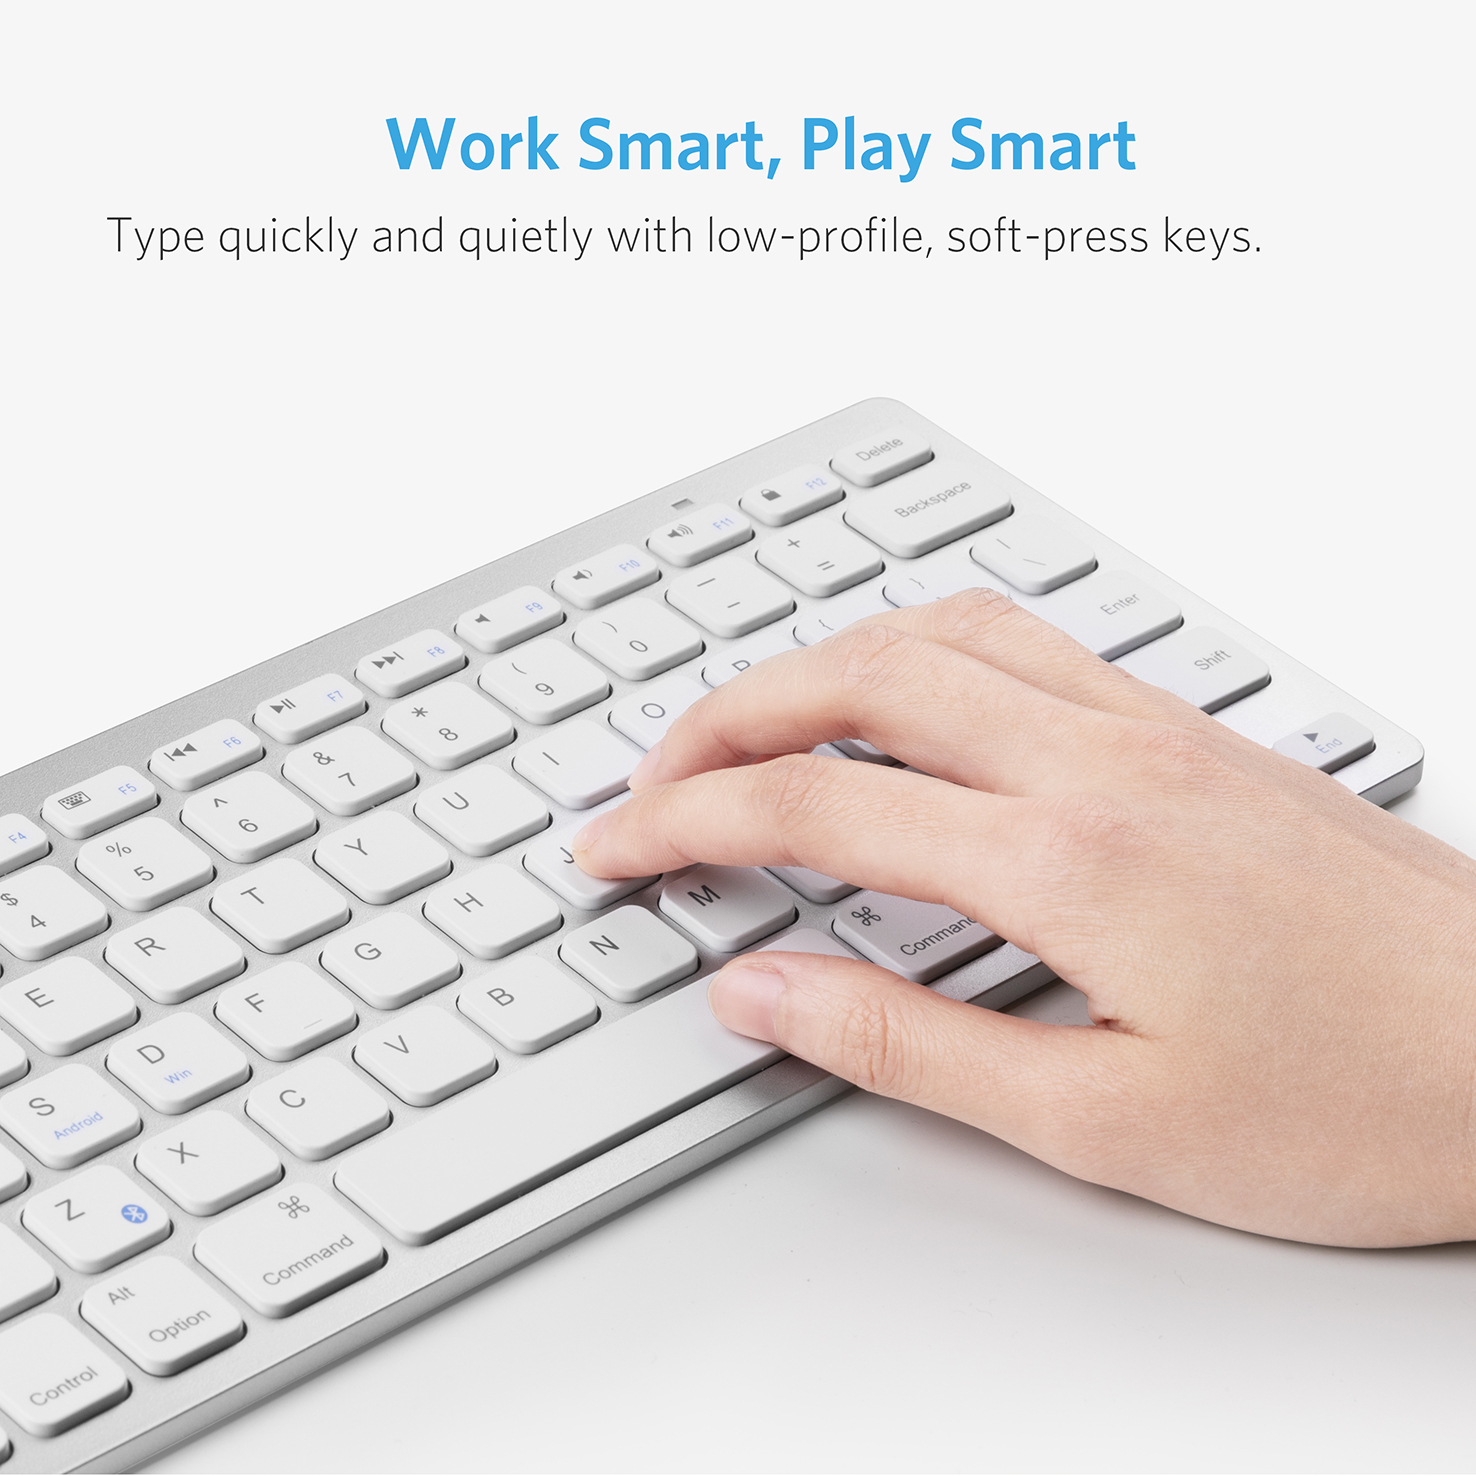 Anker Ultra Compact Slim Profile Wireless Bluetooth Keyboard for iOS, Android, Windows and Mac - image 3 of 6